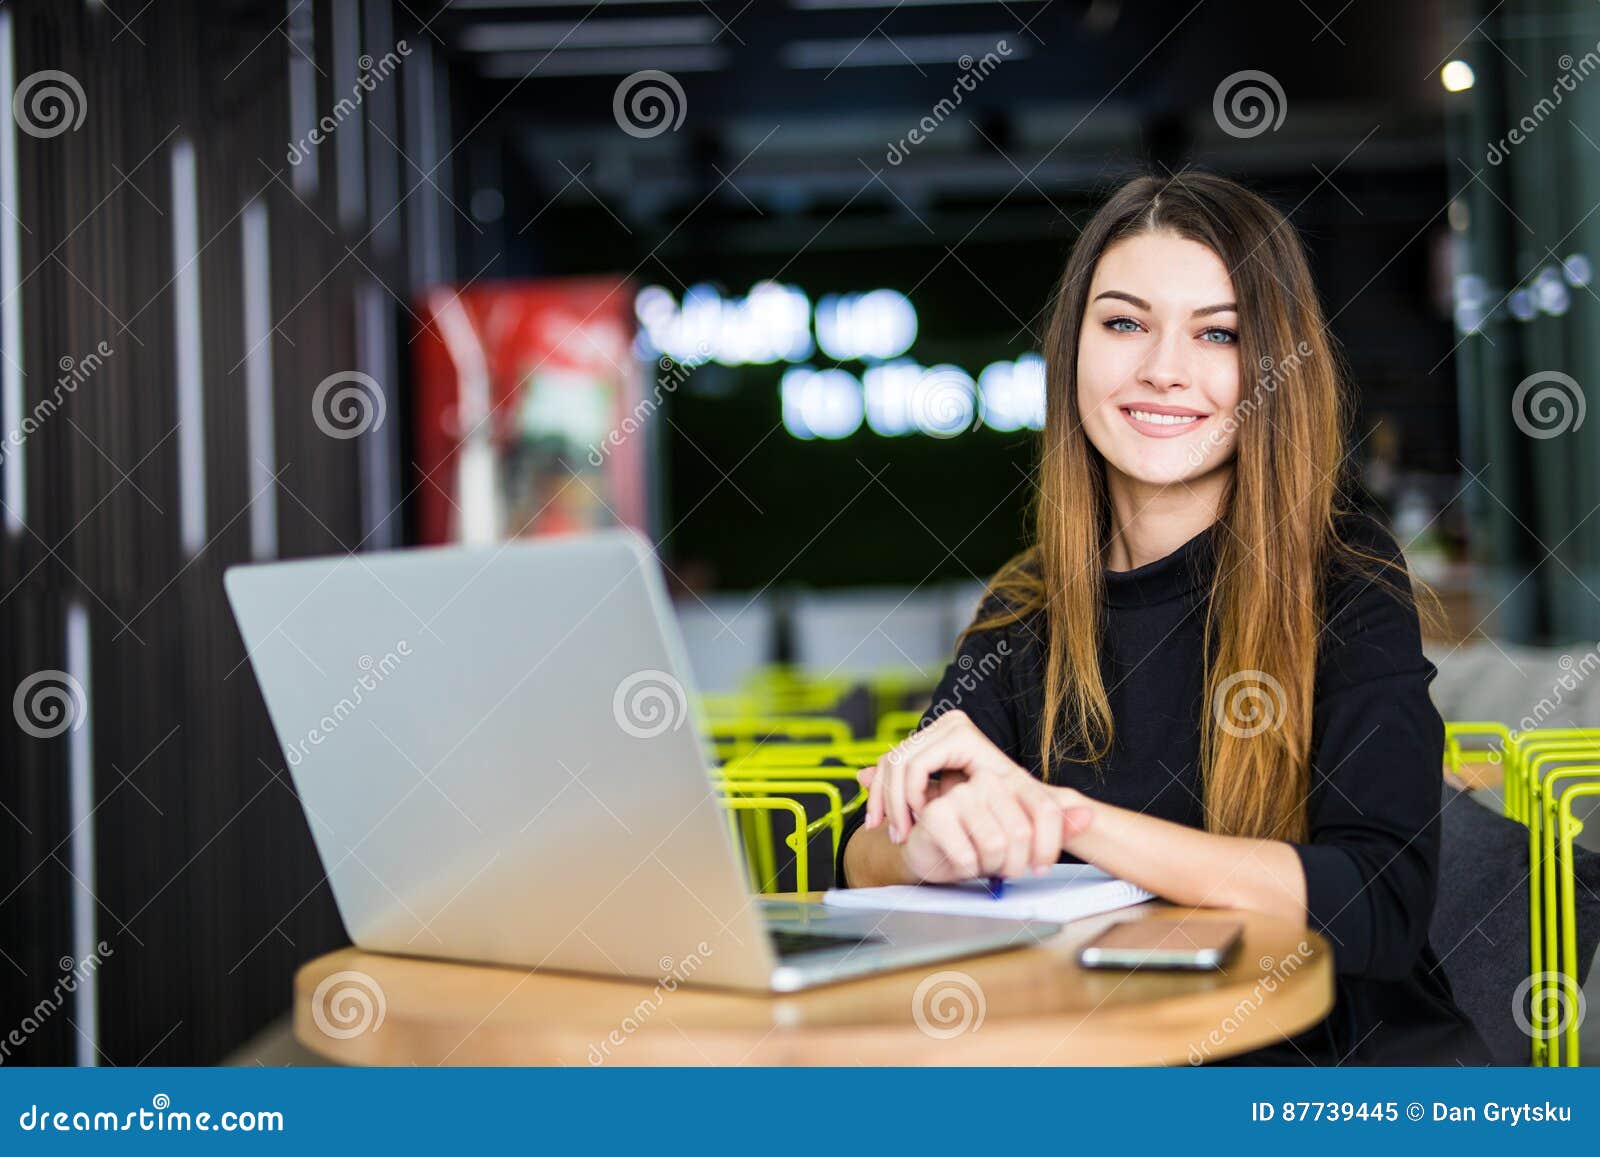 happy smiling woman working with laptop in modern smart space hub